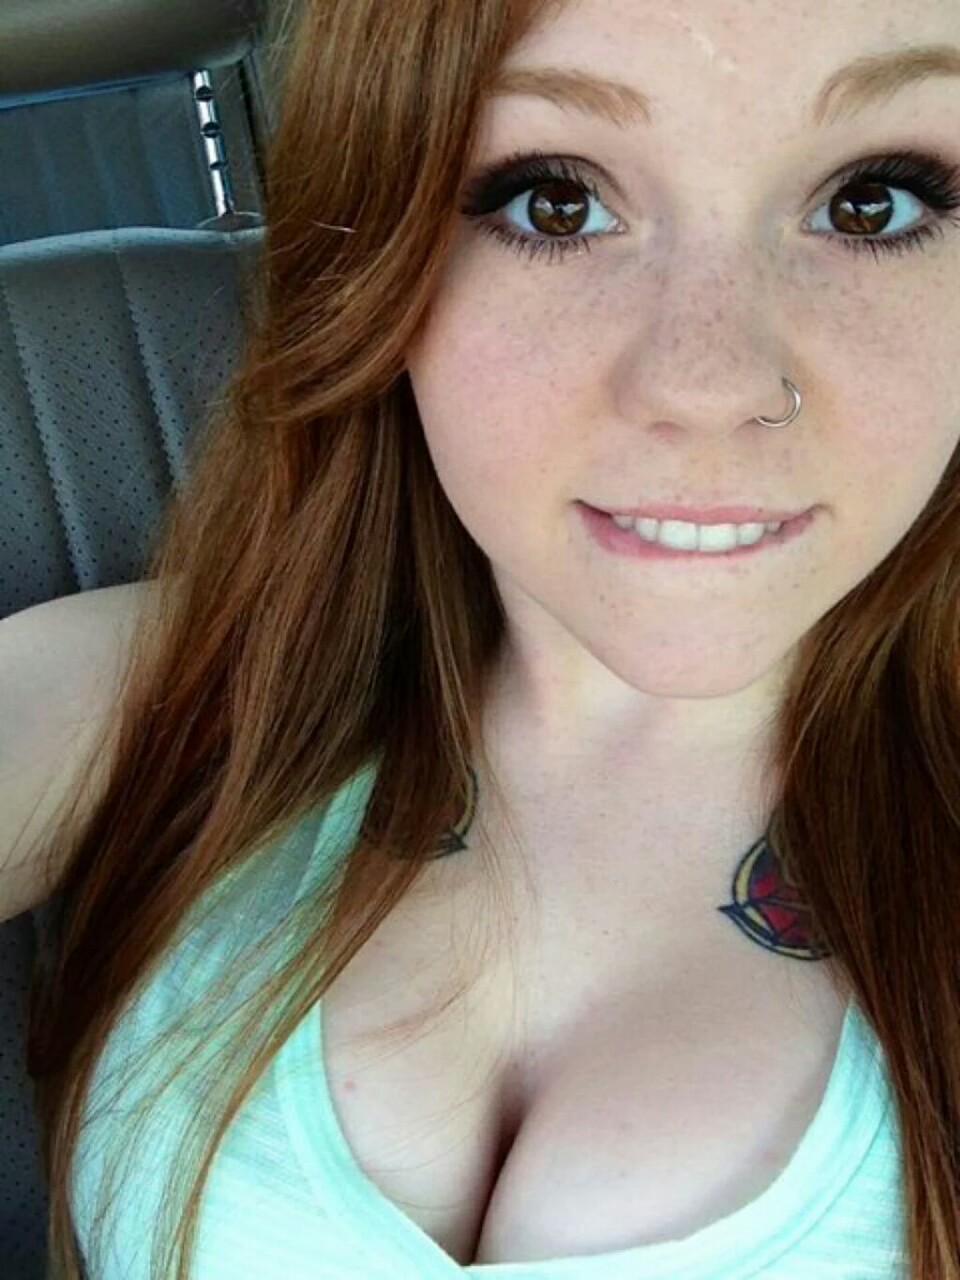 bbw gifs low quality porn pic bigtits Redhead Redhaired Redhair Freckles Ginger Amateur Selfshot Selfie Freckled Freckle Tinytits Perky Perkytits Smallboobs Tiny